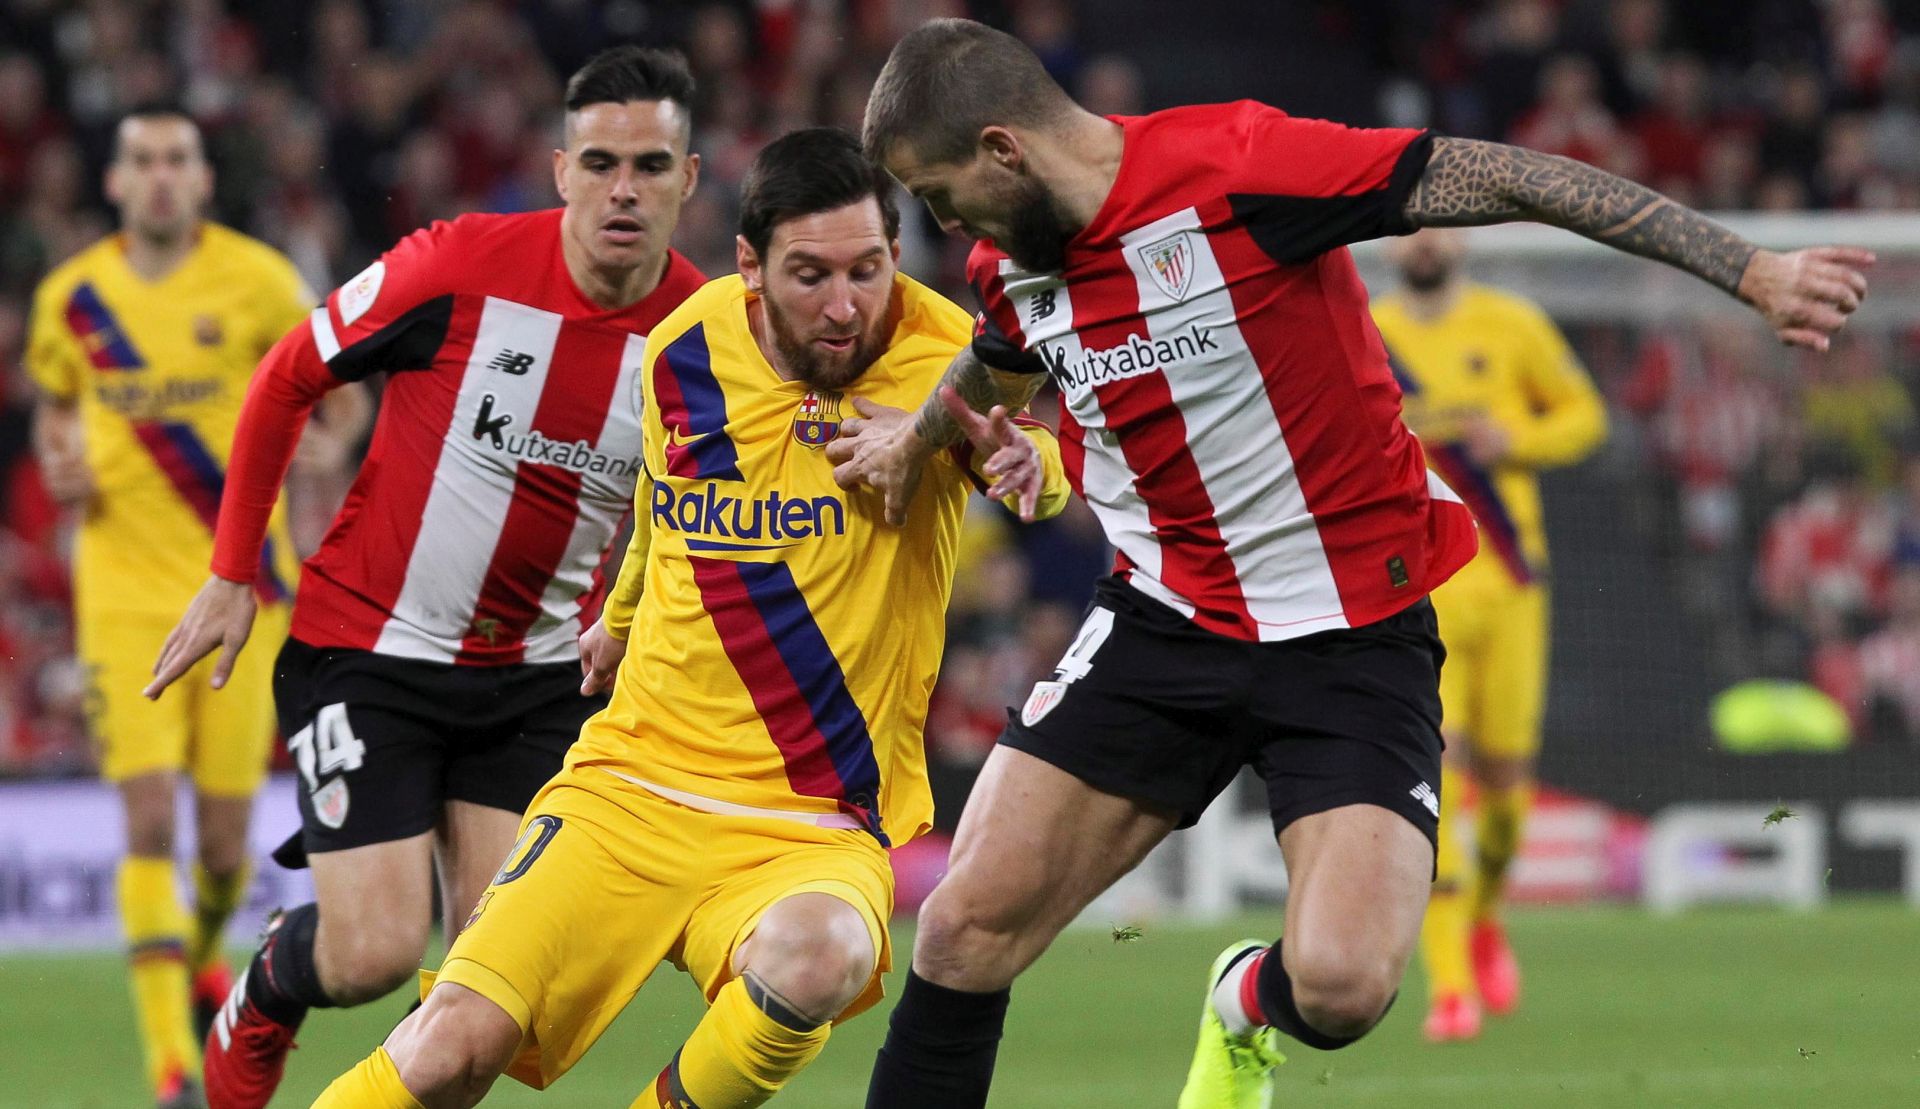 epa08198635 Athletic Club's defender Yeray (R) vies for the ball against FC Barcelona's forward Leo Messi (C) during the Spanish King's Cup quarters final between Athletic Bilbao and FC Barcelona at San Mames stadium in Bilbao, northern Spain, 06 February 2020.  EPA/MIGUEL TONA